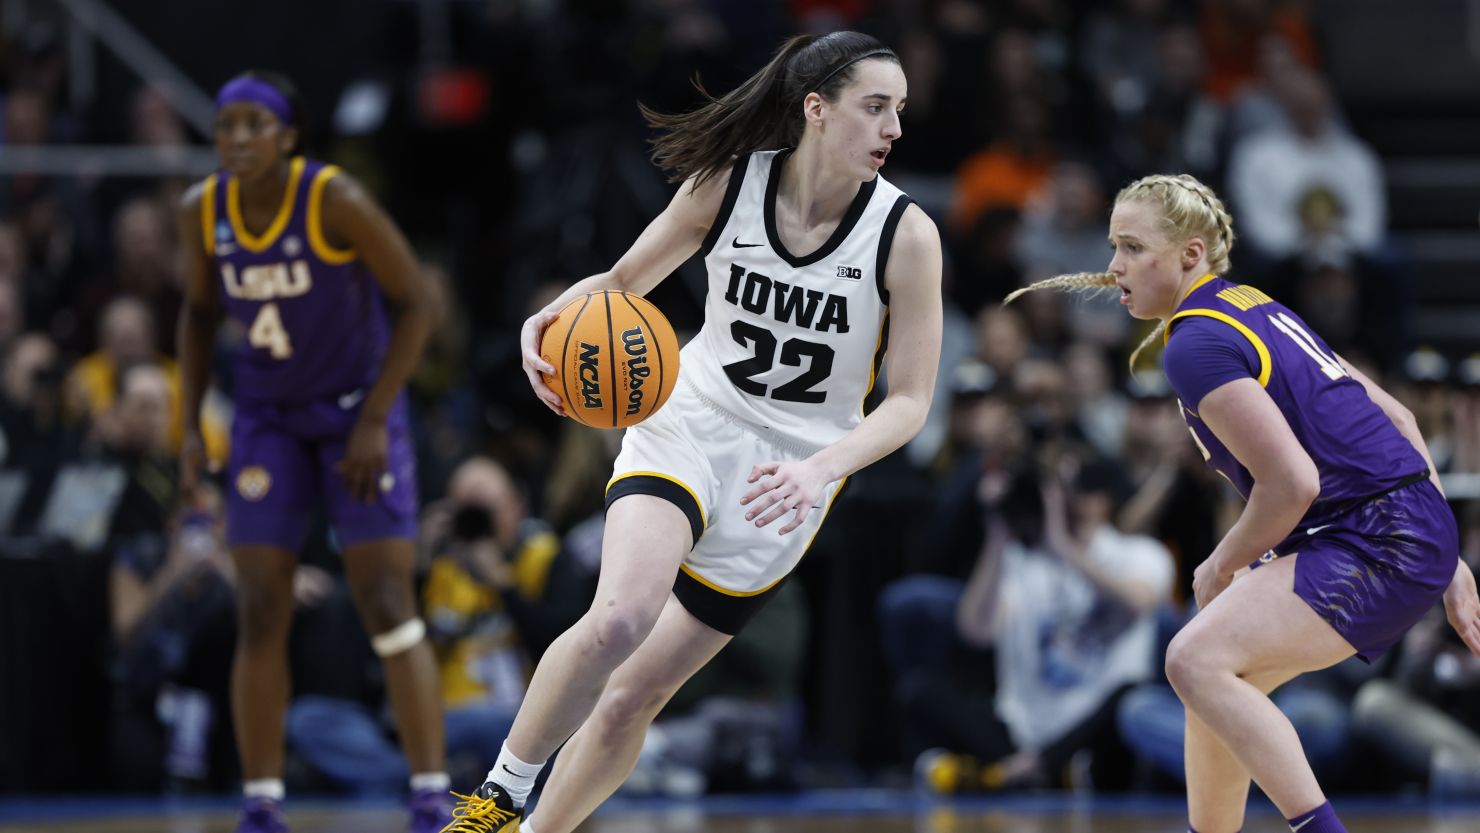 Caitlin Clark of the Iowa Hawkeyes dribbles against Hailey Van Lith of the LSU Tigers at last Monday's NCAA Women's basketball game in Albany, New York.